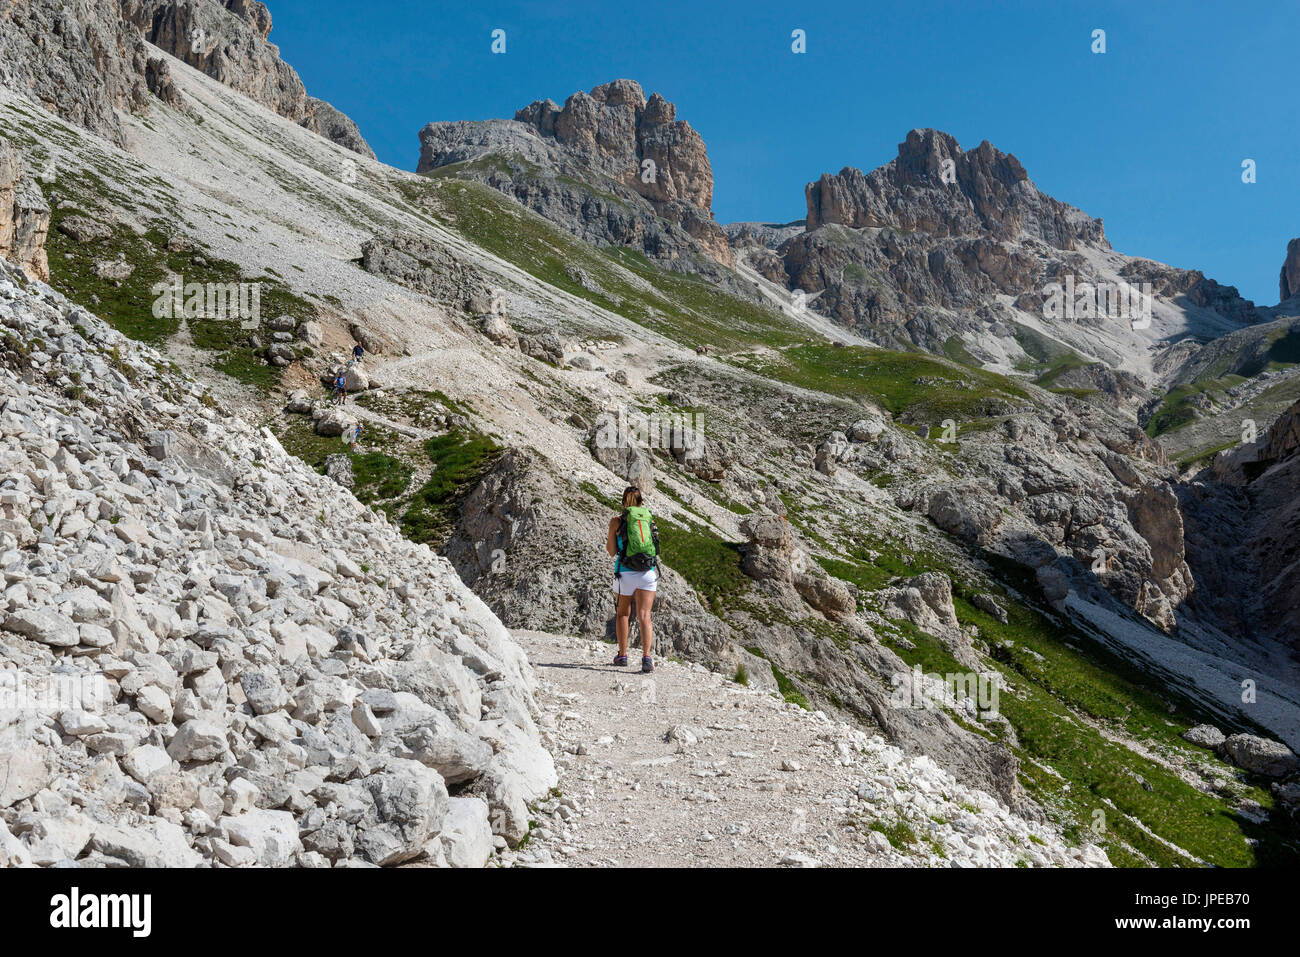 Italy, Trentino Alto Adige, Val di Fassa, Hiker on his way to the Principe Pass along the trial n.584 from the Vajolet refuge Stock Photo